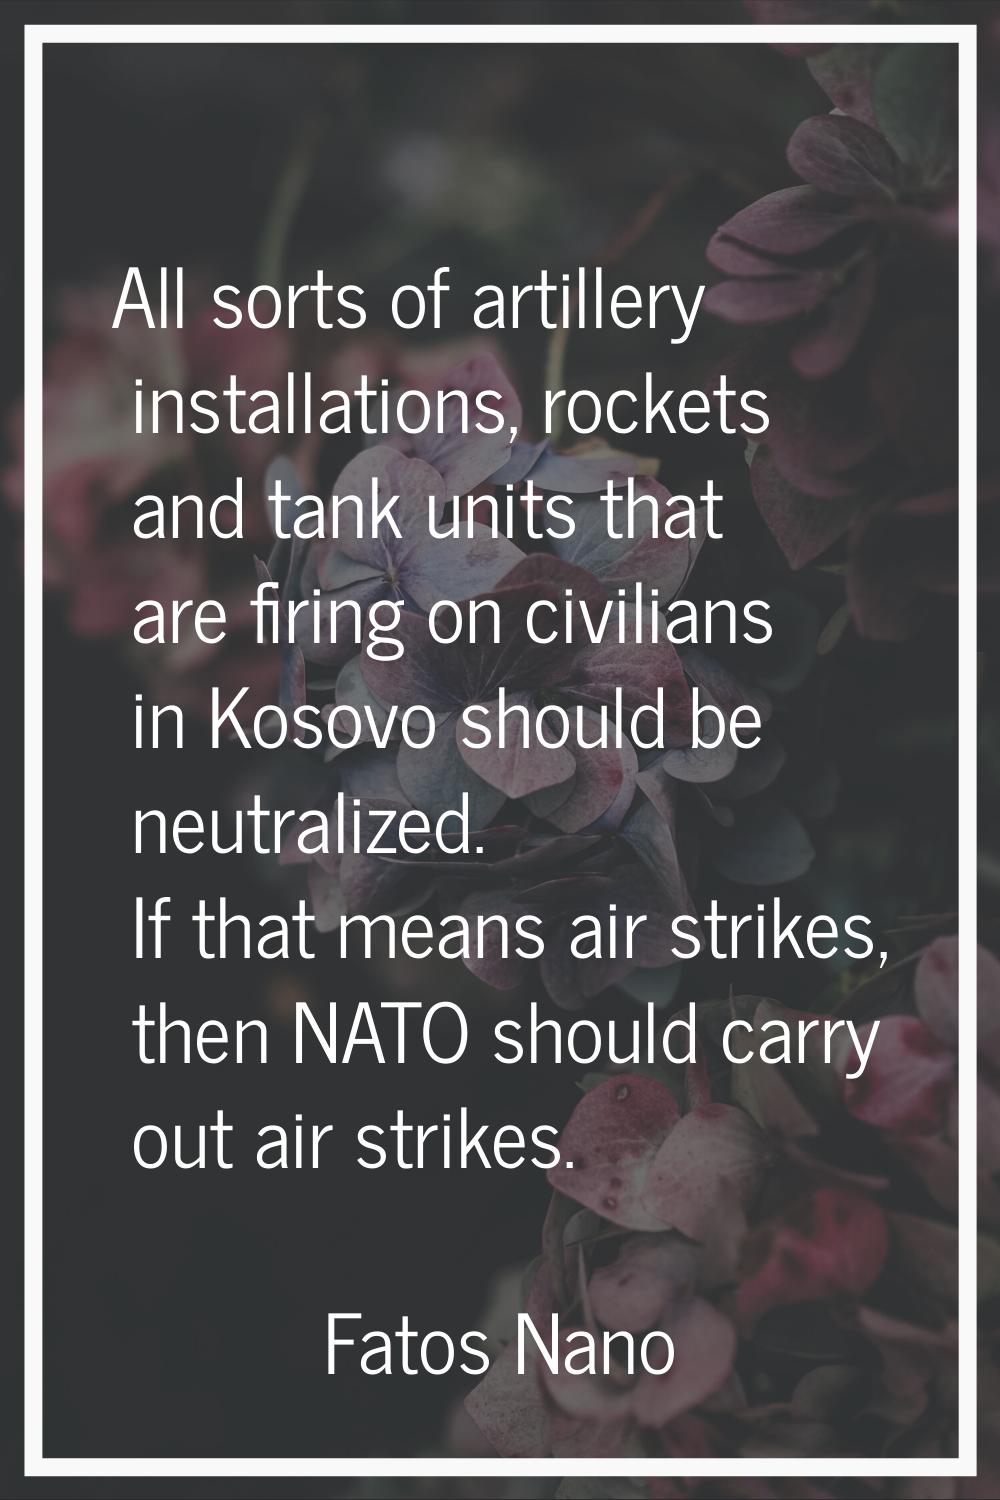 All sorts of artillery installations, rockets and tank units that are firing on civilians in Kosovo